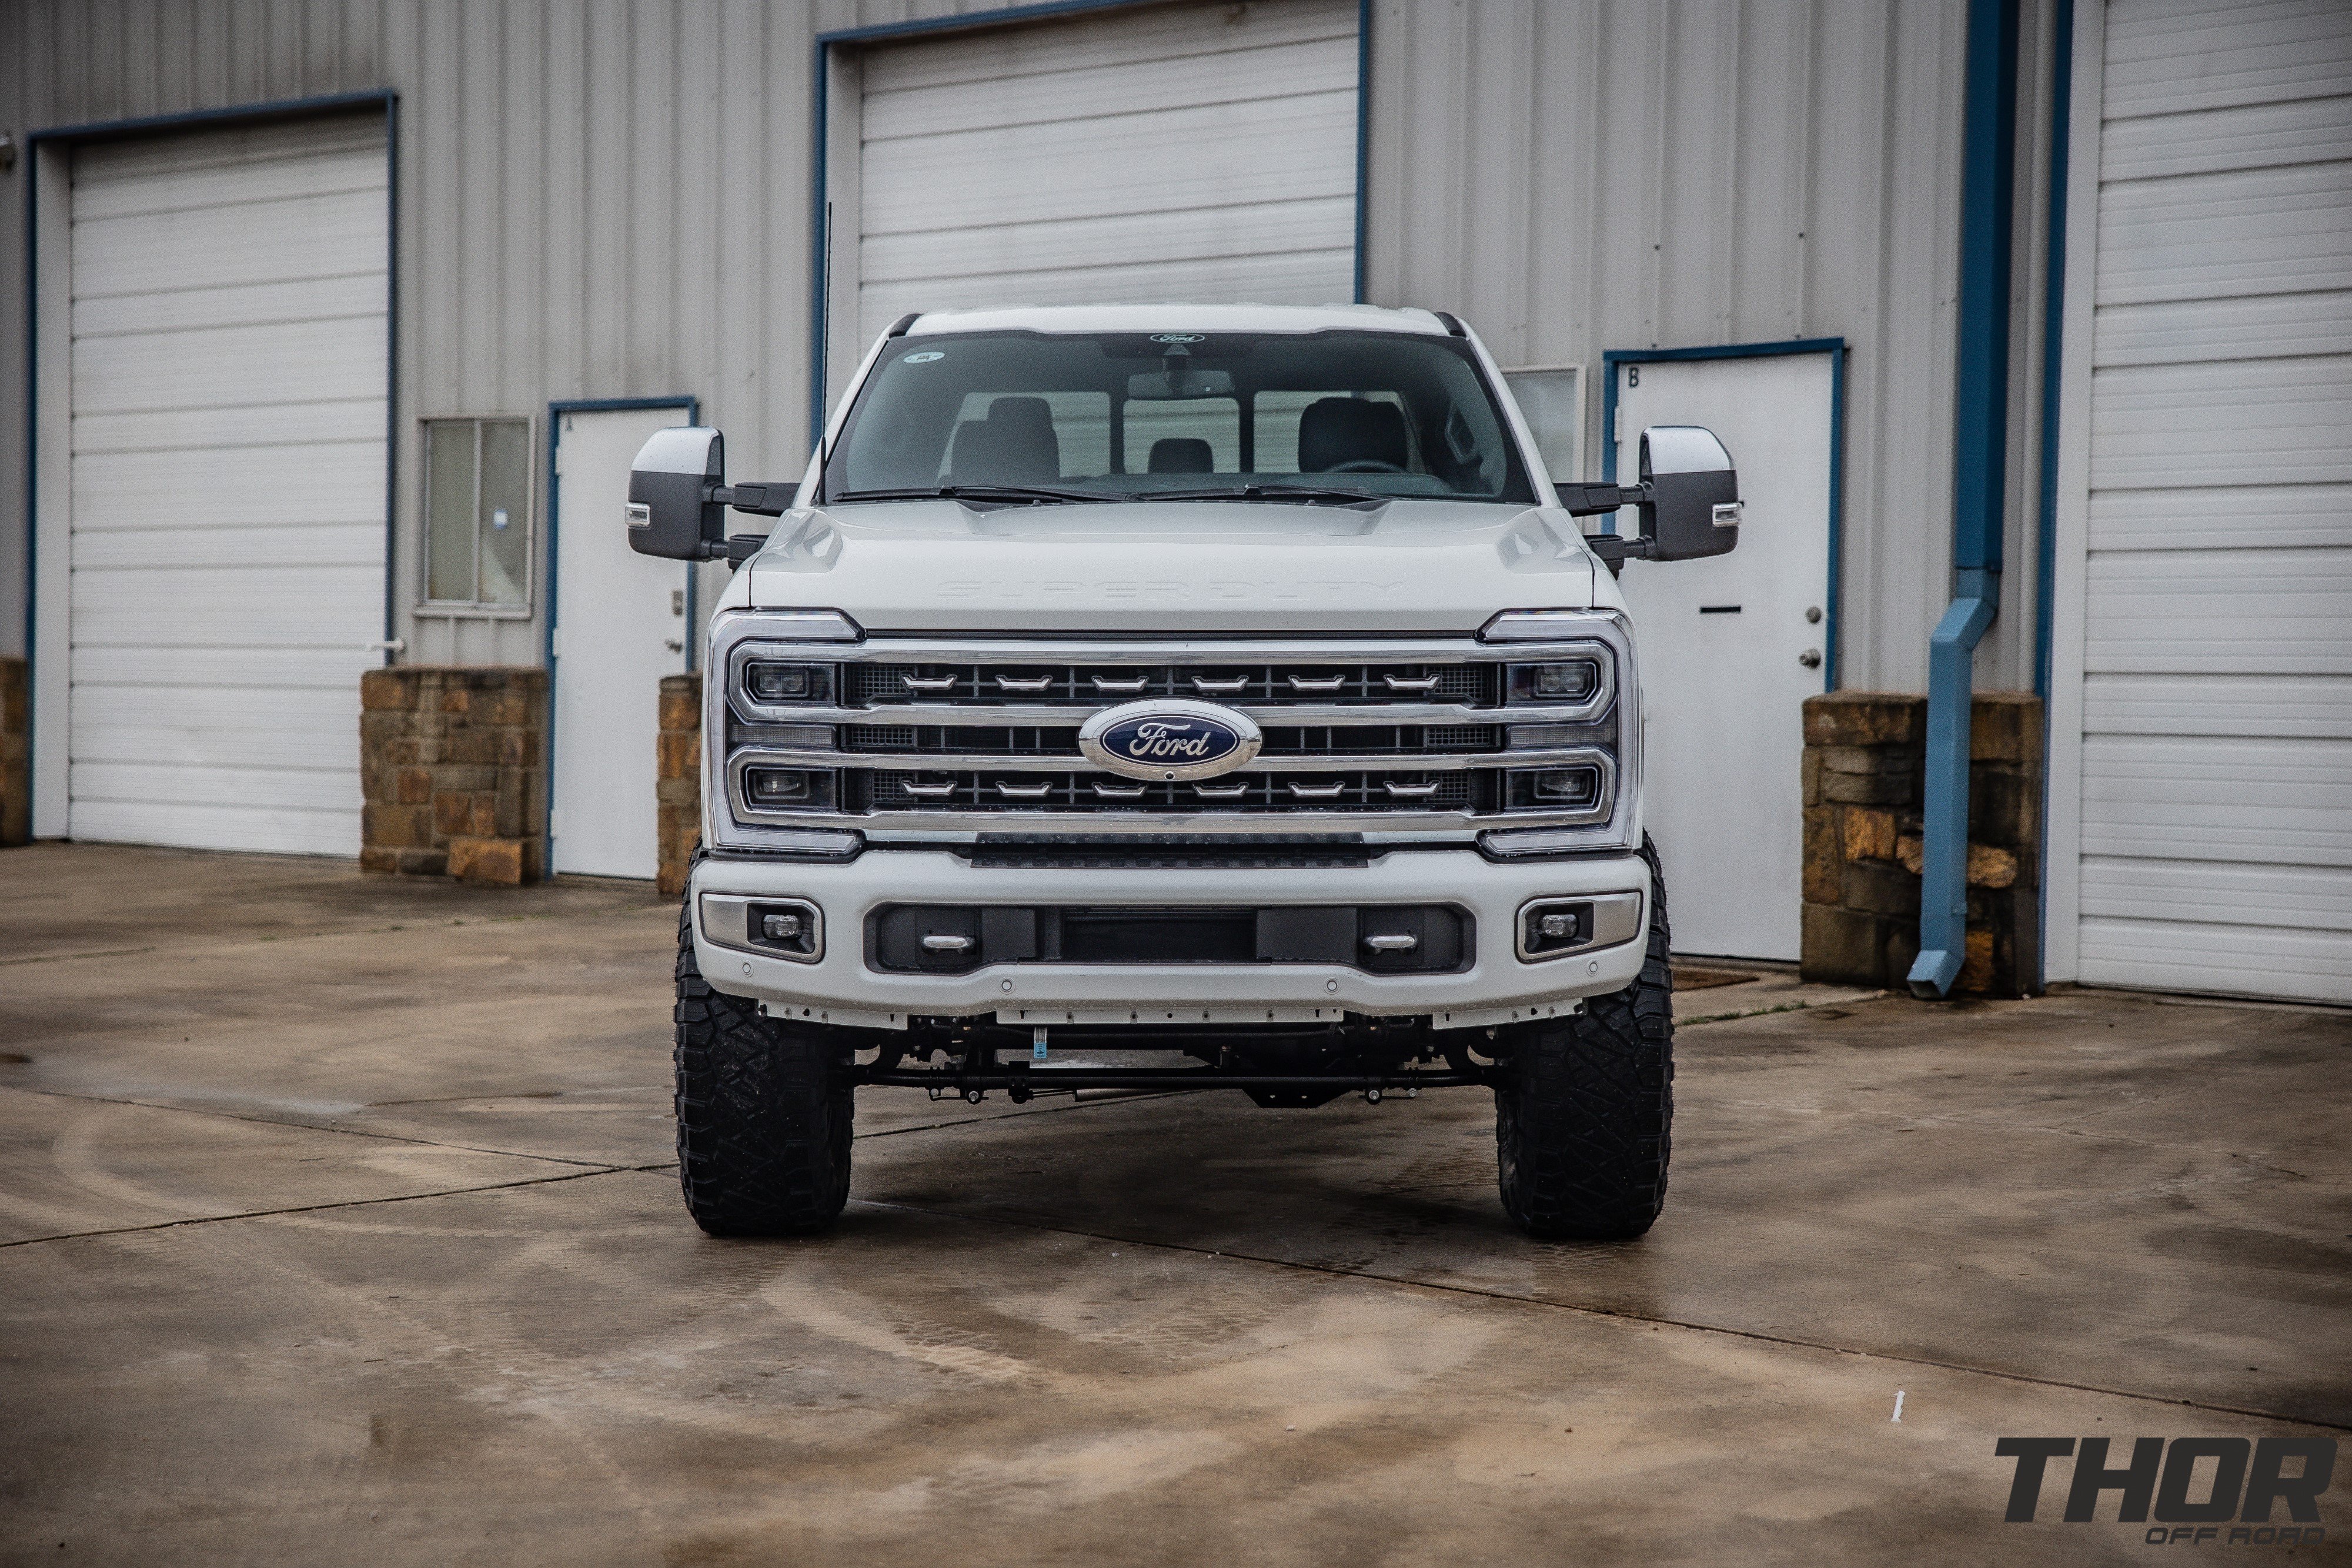 2024 Ford F-250 Super Duty Platinum in White with Carli Backcountry 3.5" Suspension Kit, Carli Sway Bar Drop Bracket, Carli Full Rear Spring Replacement, Carli High Mount Steering Stabilizer, Carli Low Mount Steering Stabilizer, Fuel Blitz 20x9" +20 Wheels, Nitto Ridge Grappler Tires